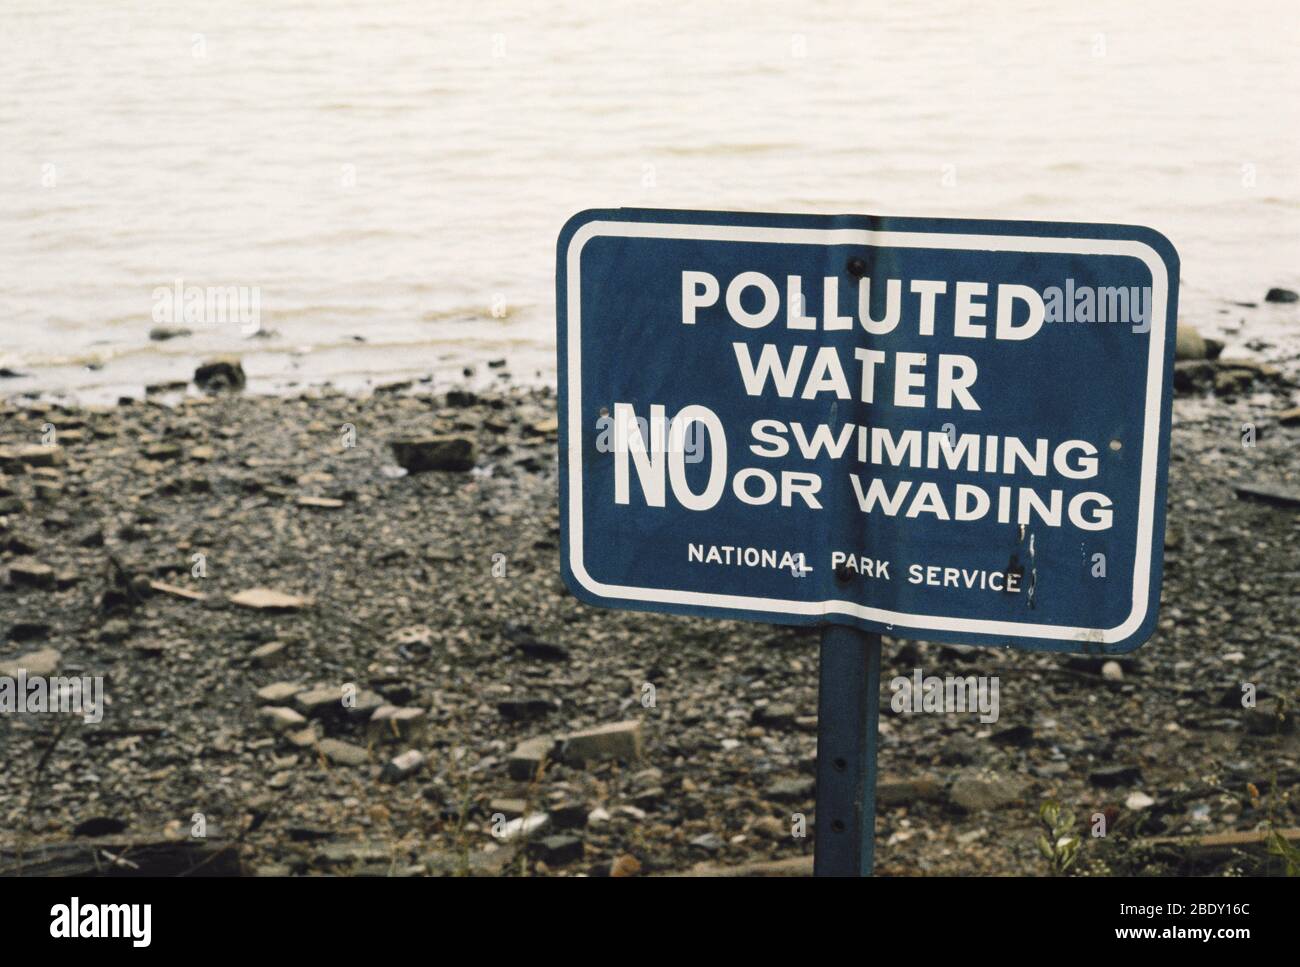 Polluted Potomac River Stock Photo